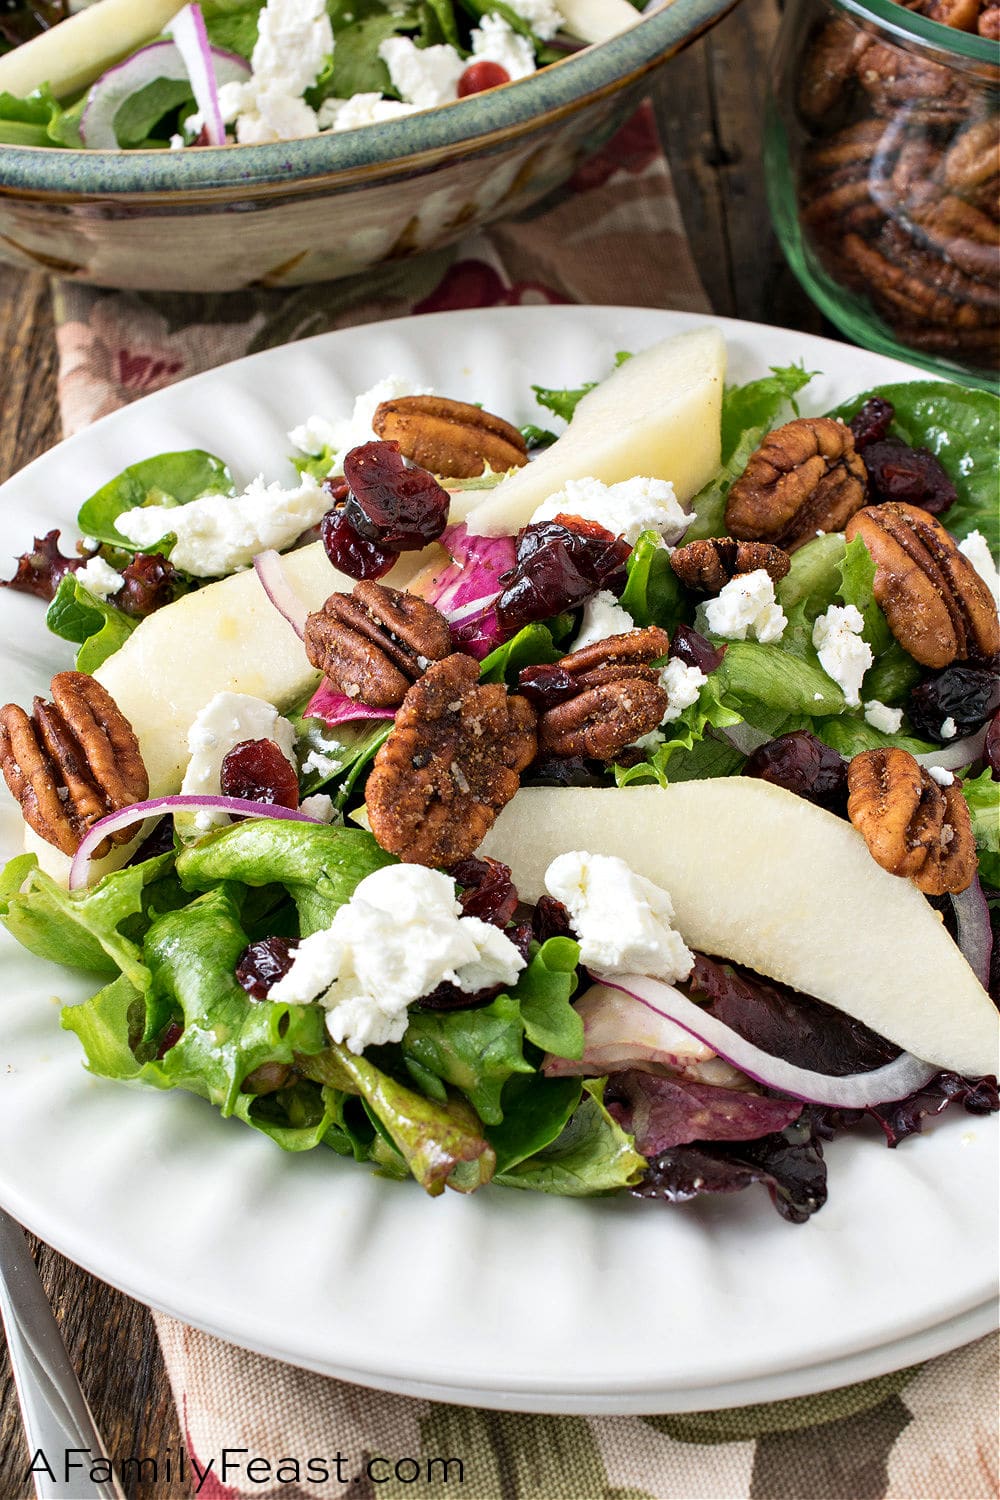 Mixed Greens with Pears, Goat Cheese, Dried Cranberries and Spiced Pecans - A Family Feast